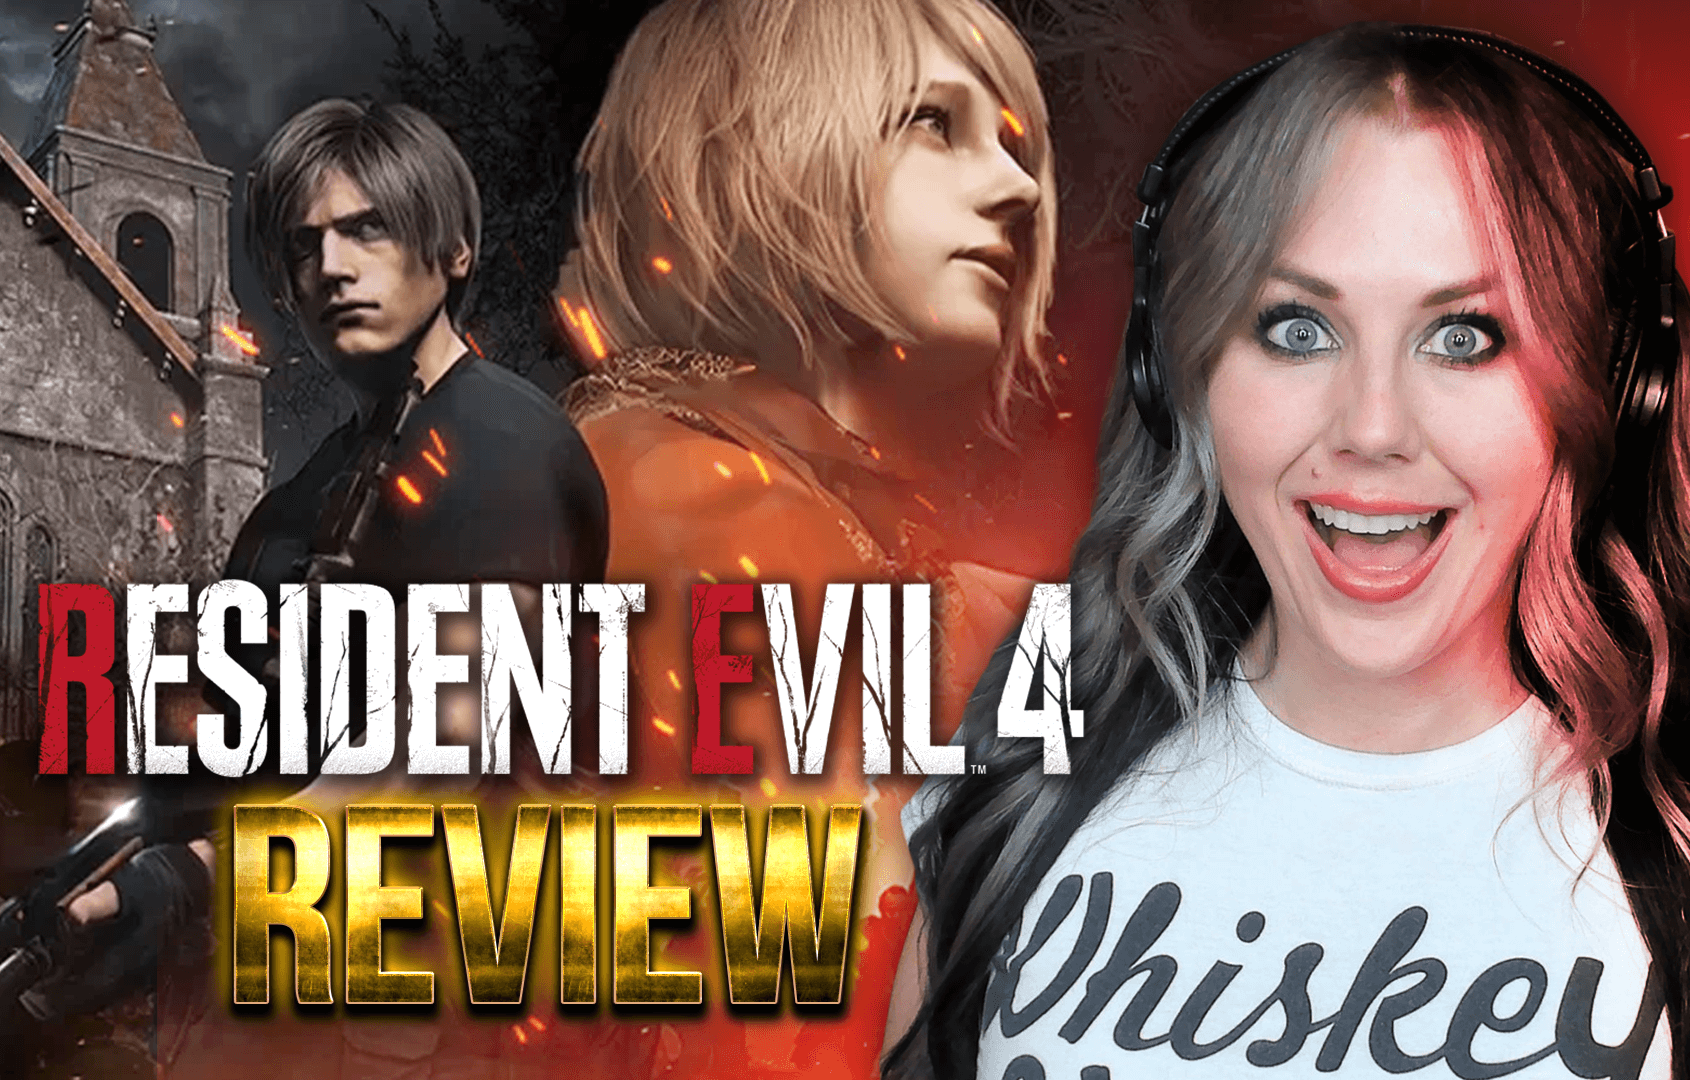 Resident Evil 4 Review I'll Buy It at a High Price Ep. 318 What's